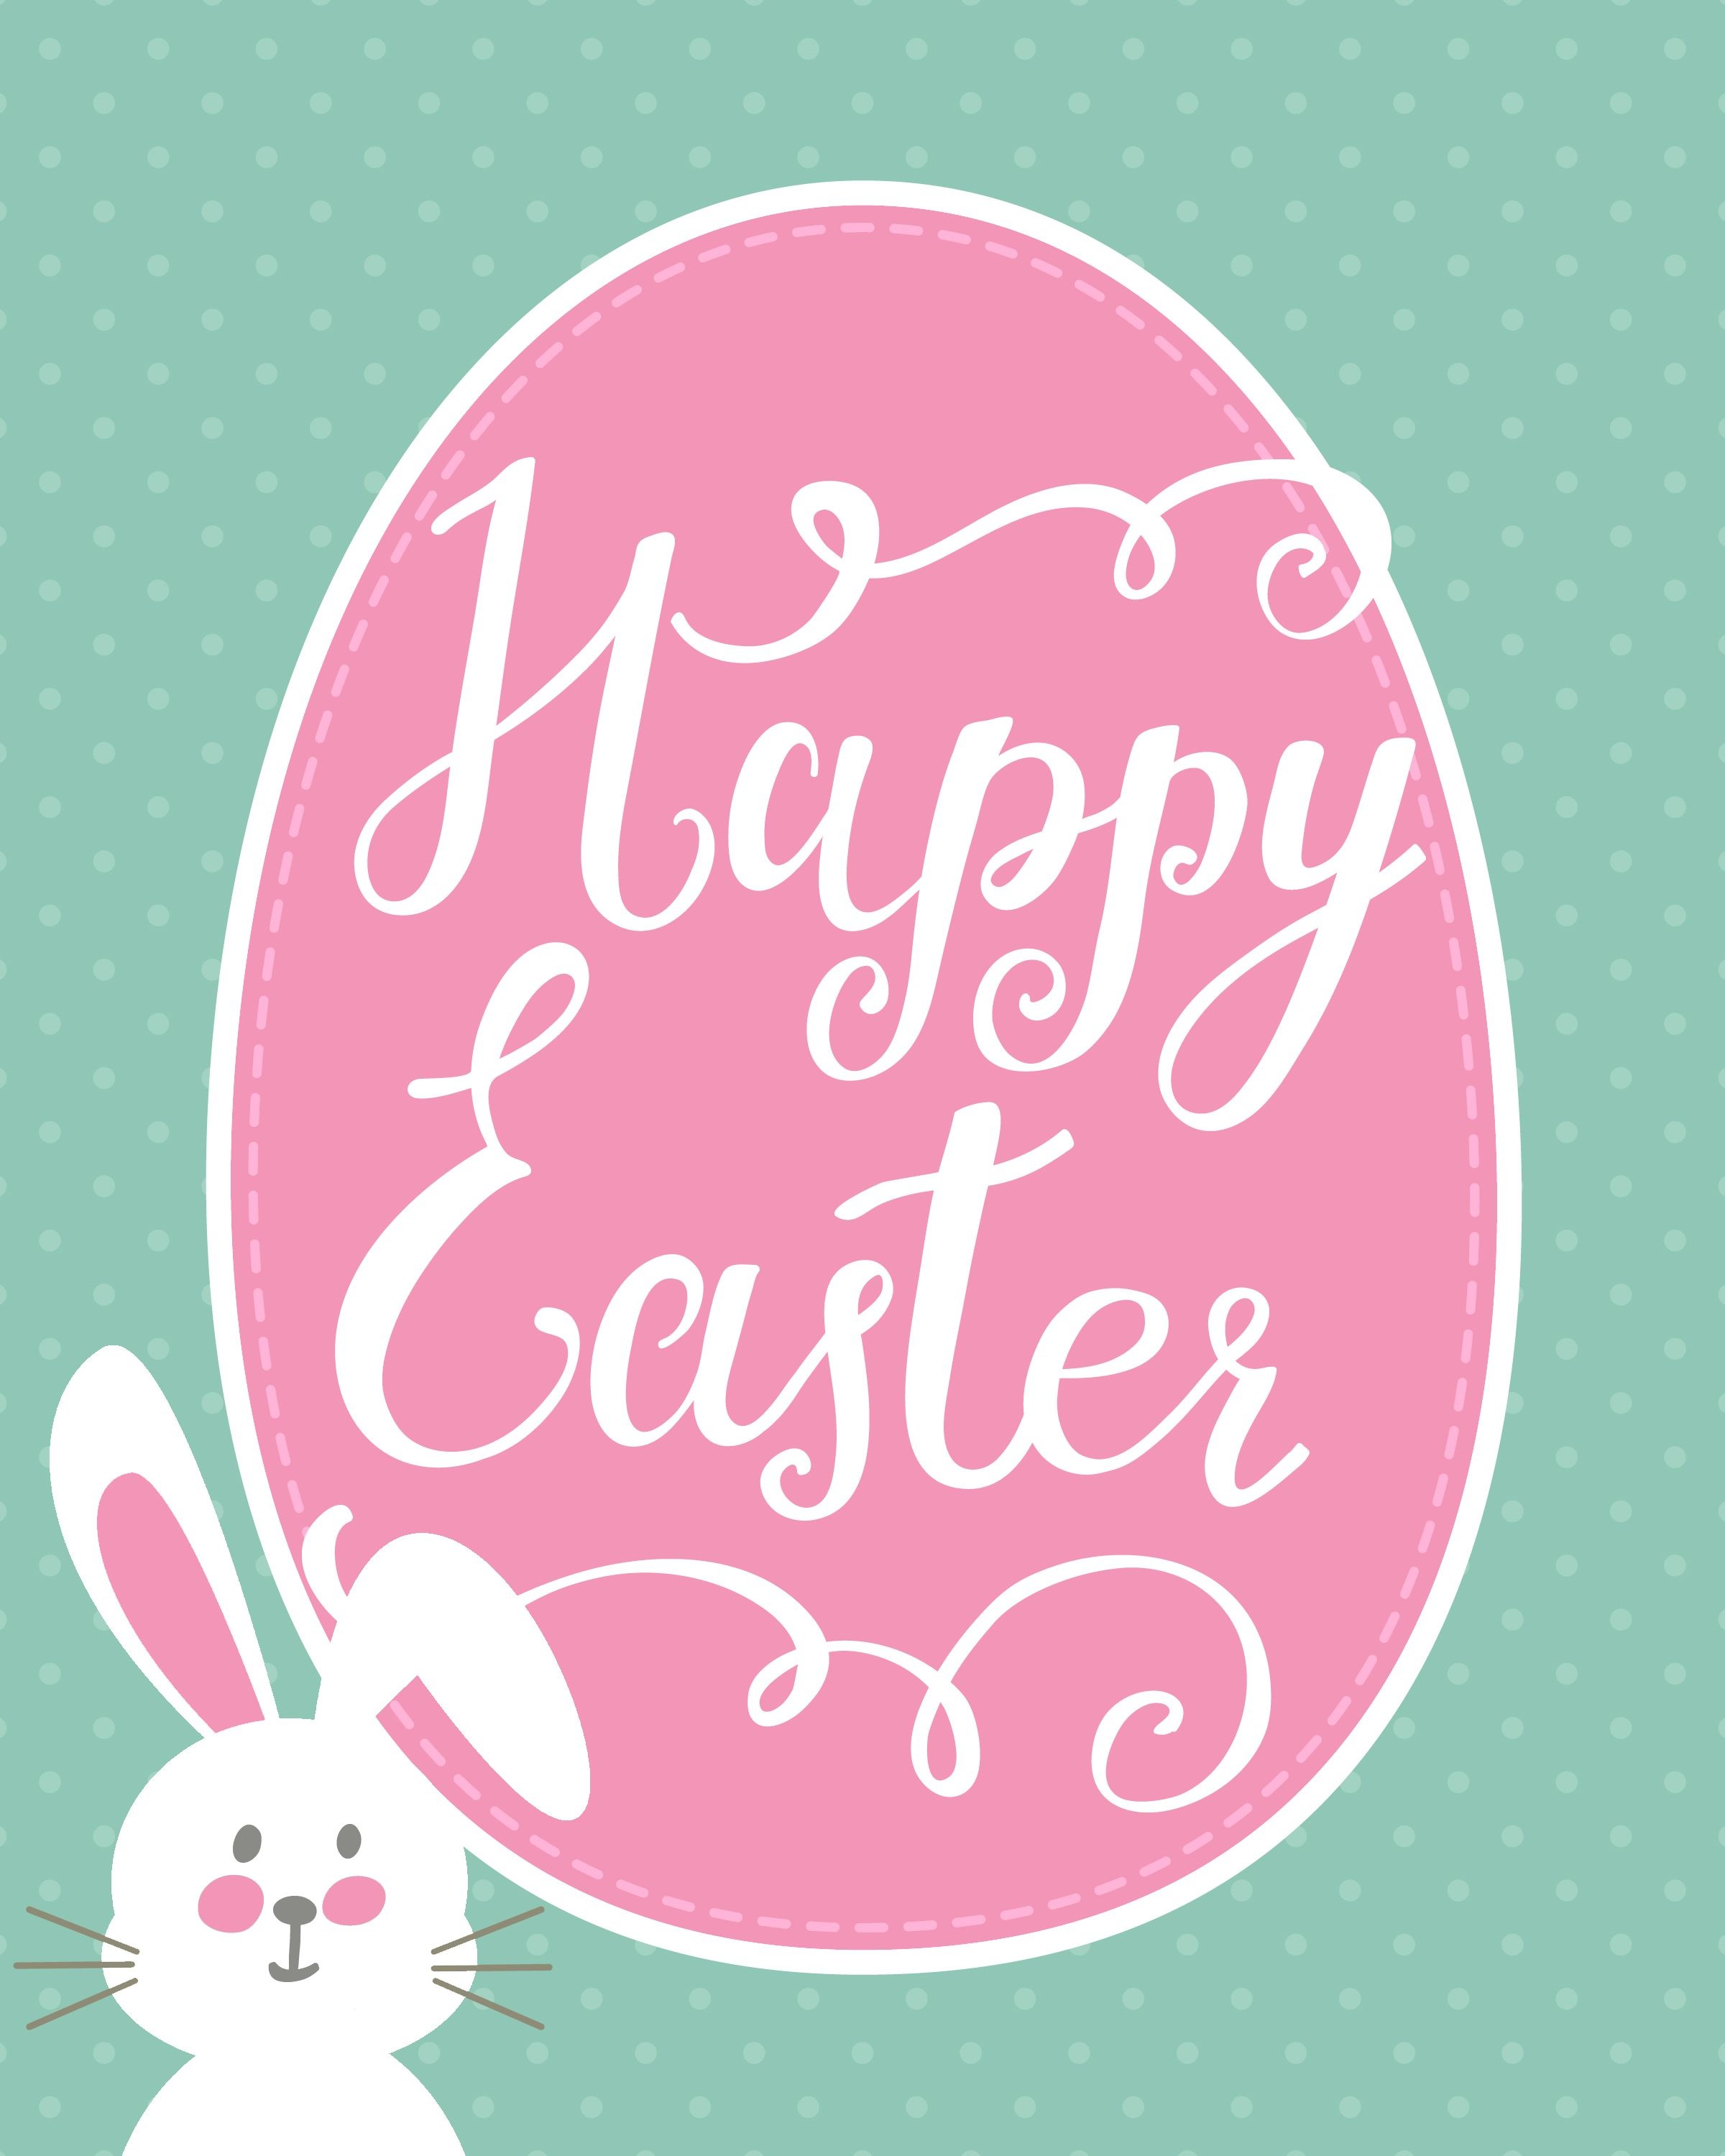 Happy Easter Bunny Printable | Holidays - Easter | Happy Easter - Free Printable Easter Greeting Cards